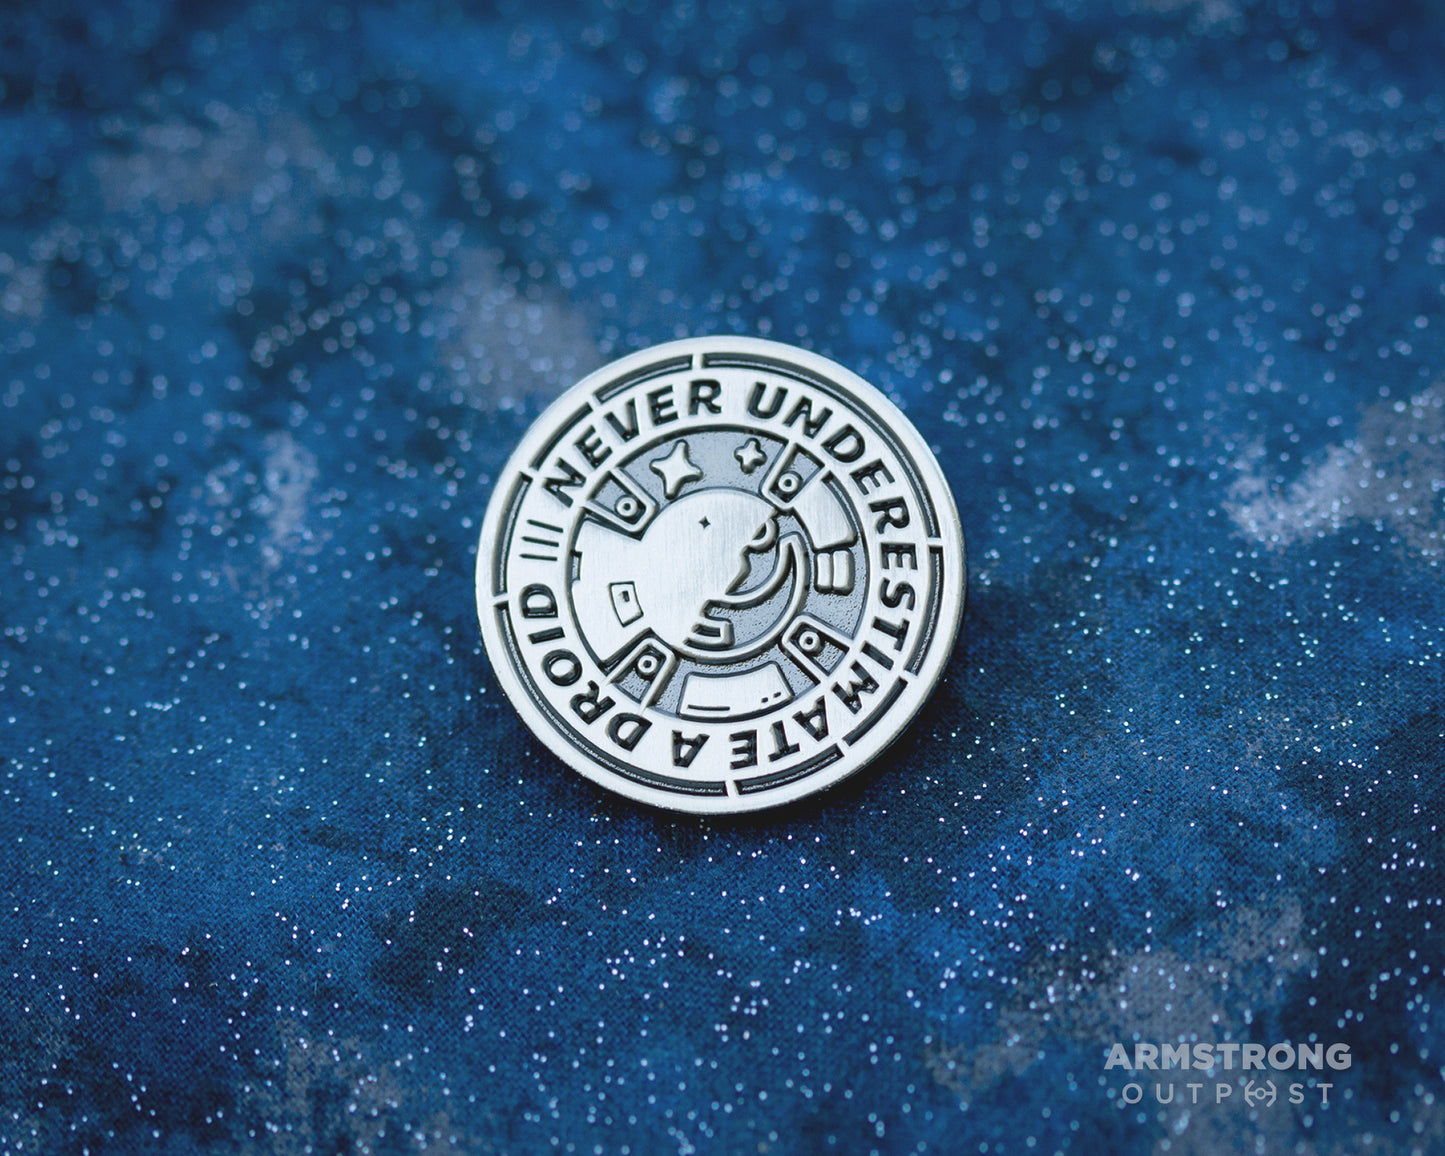 SALE! Underestimate Droid ✧ Quote Pin